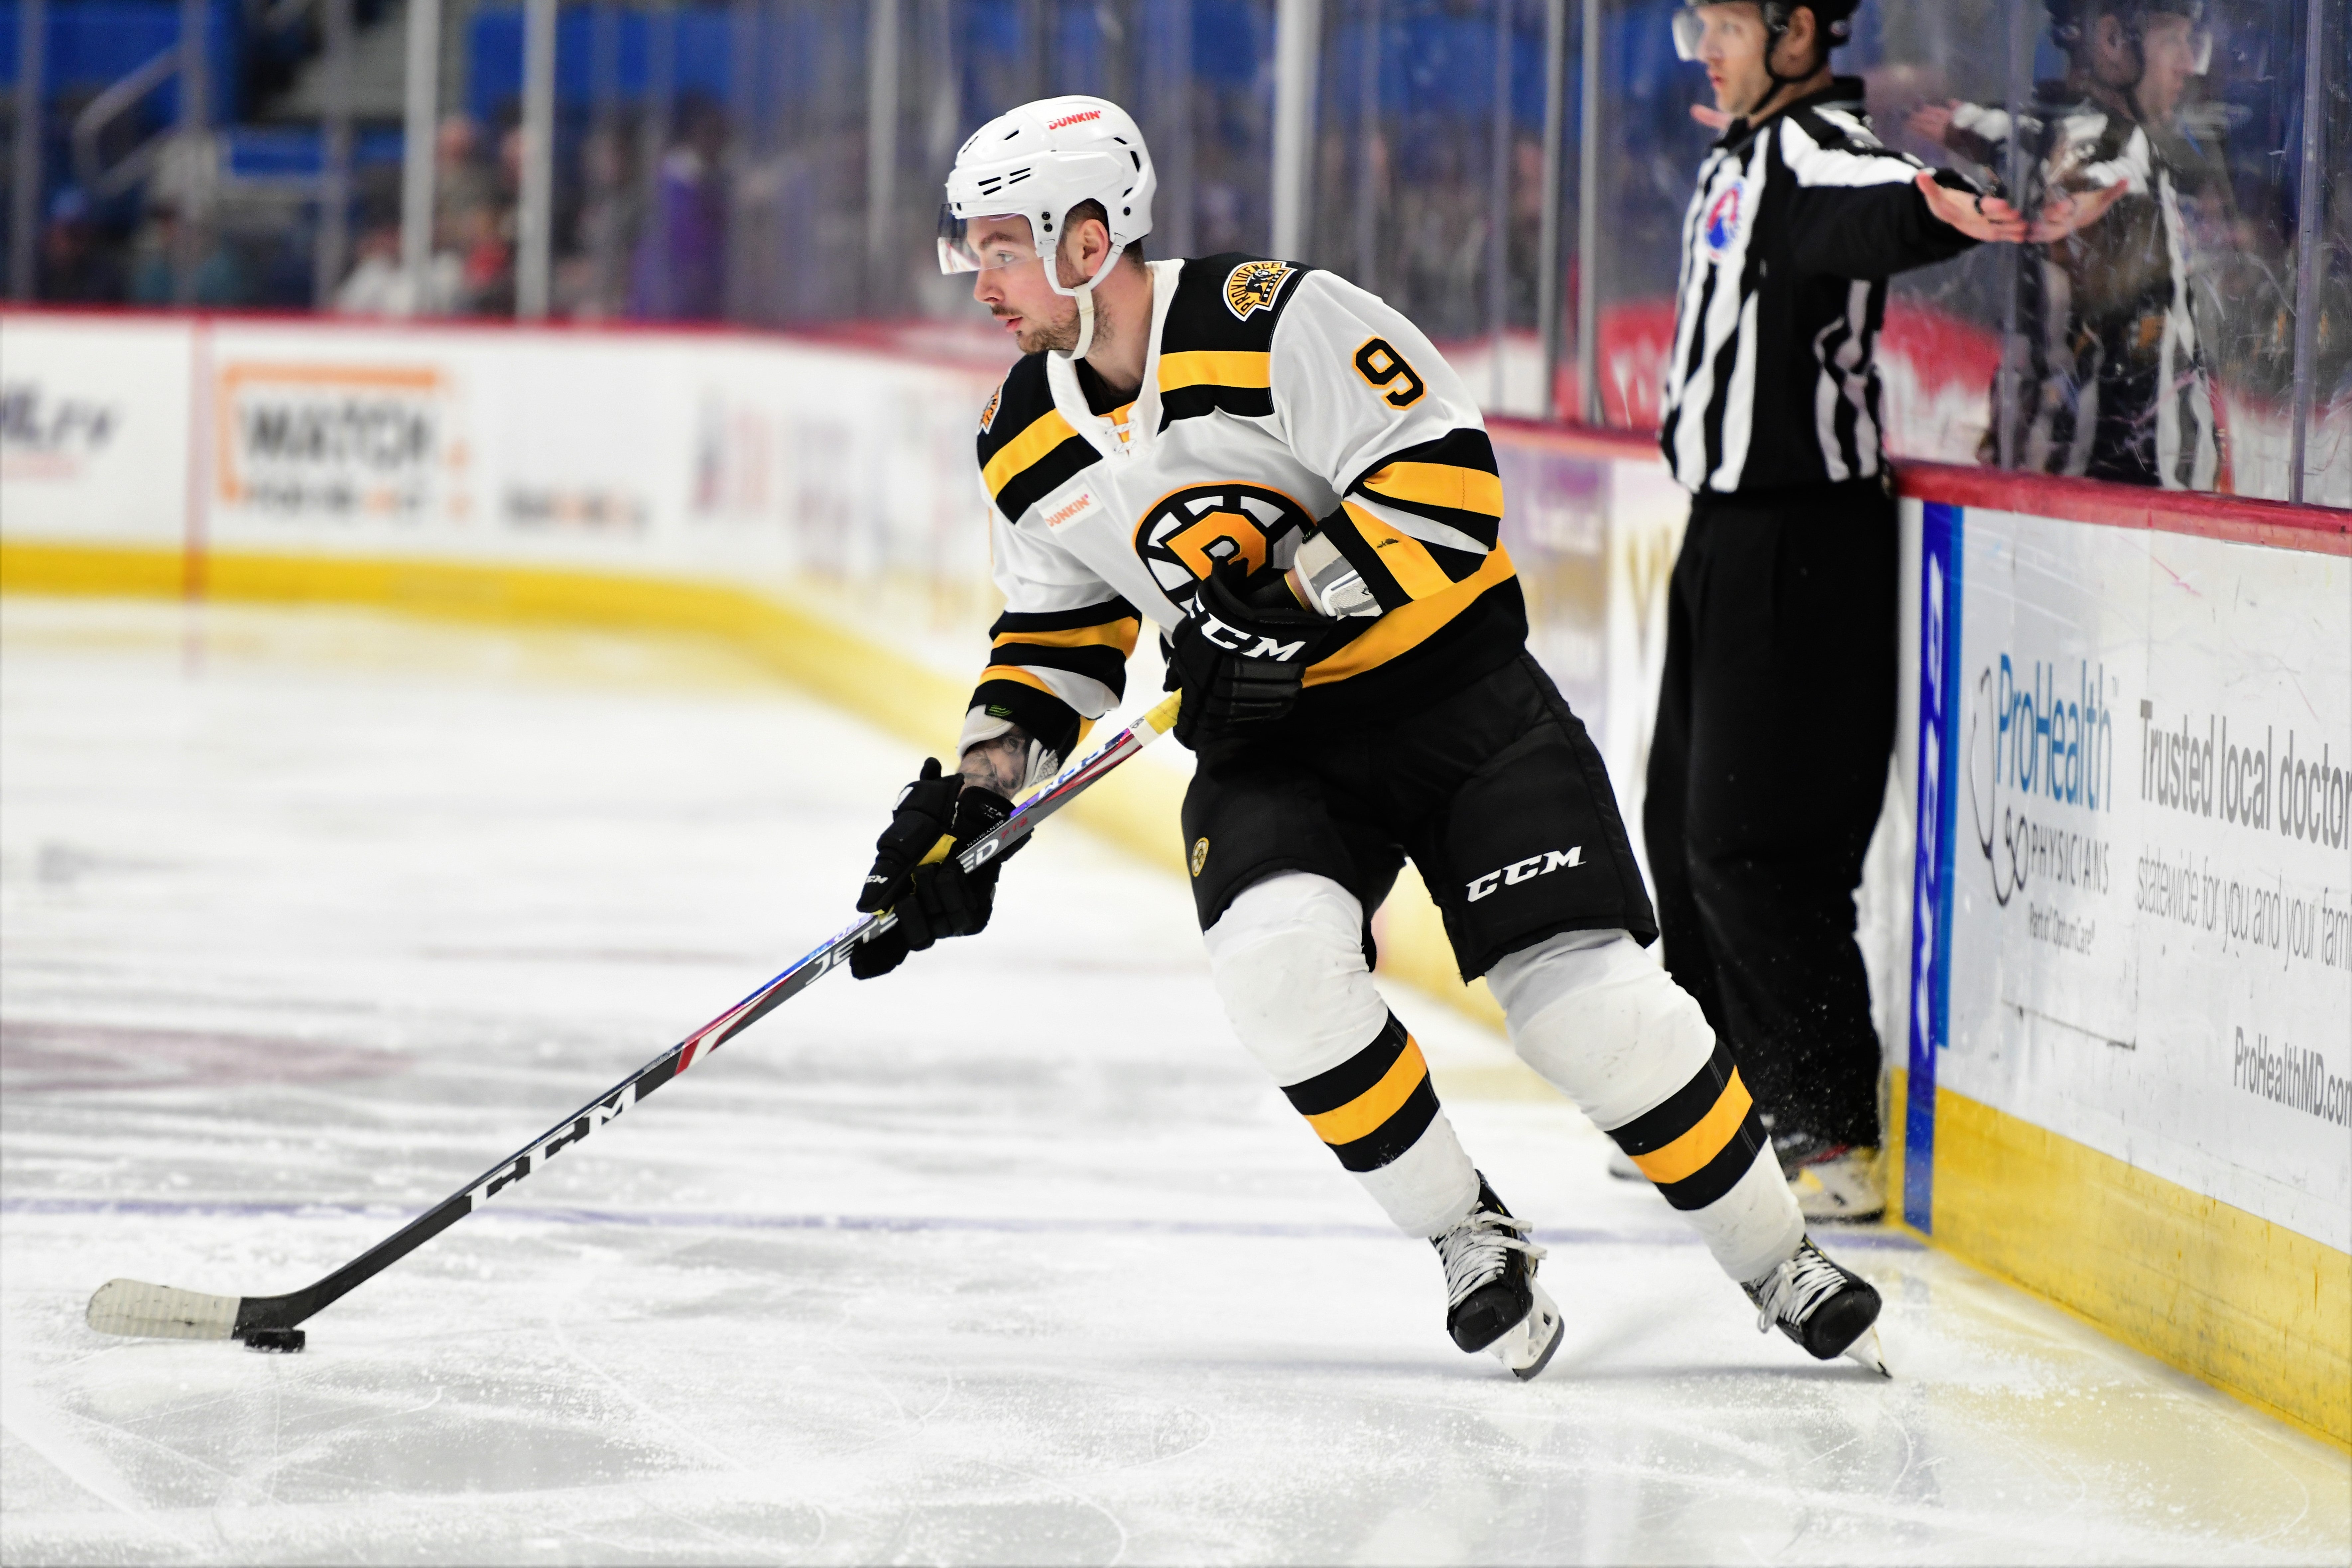 P-BRUINS SET FRANCHISE RECORD WITH 12TH CONSECUTIVE WIN | Providence Bruins